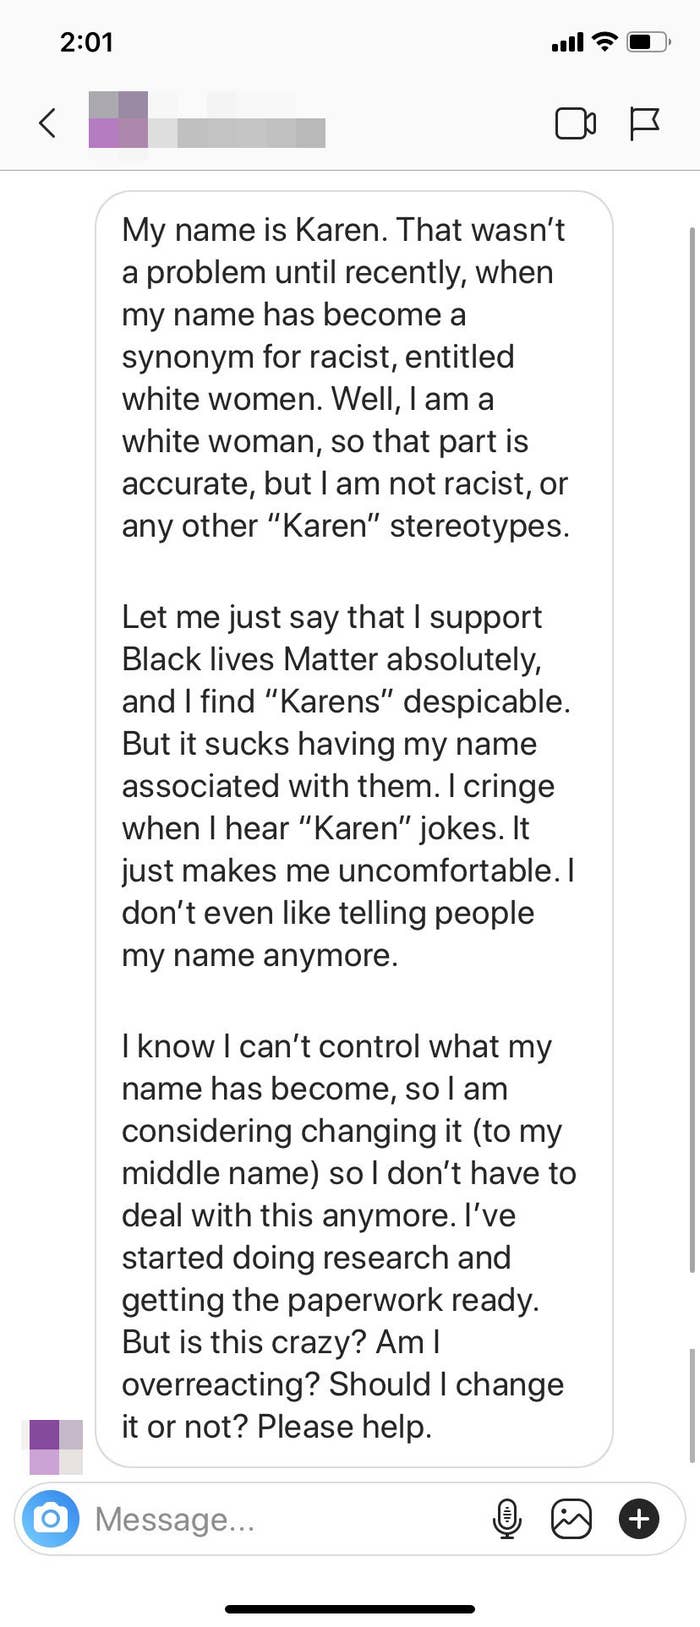 A screenshot of an Instagram DM from a white woman named Karen who wants to legally change her name, to avoid any associations with "racist, entitled" white women